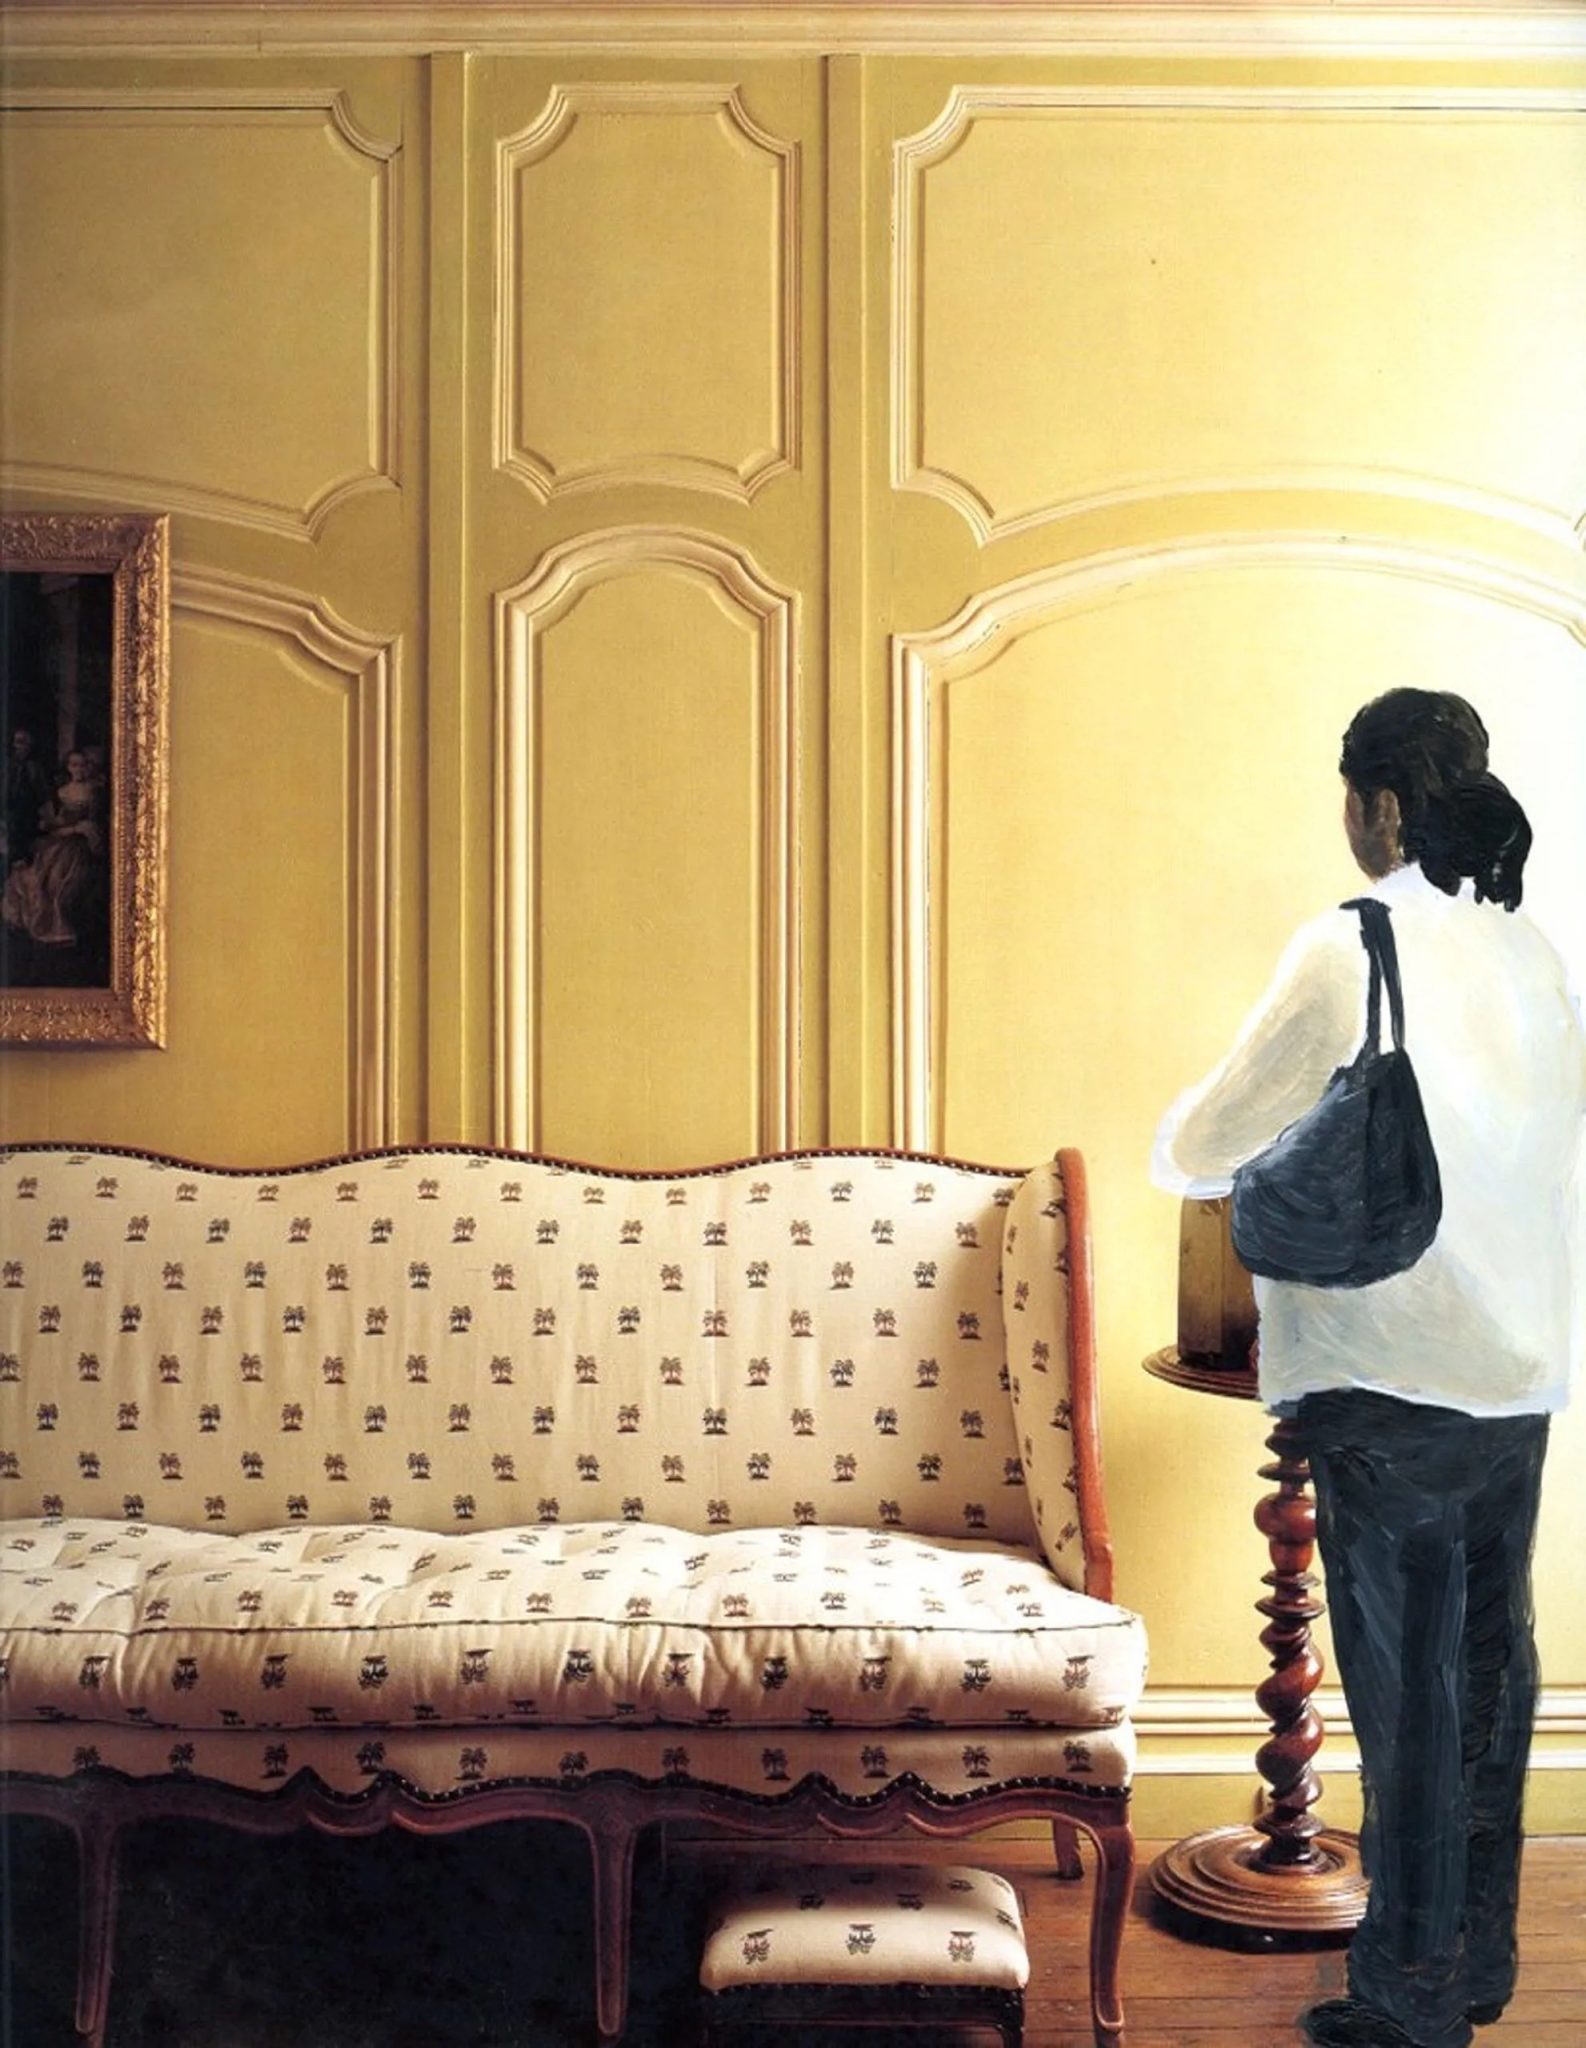 A woman with a black handbag waiting inside a room in a large house next to an ornate couch